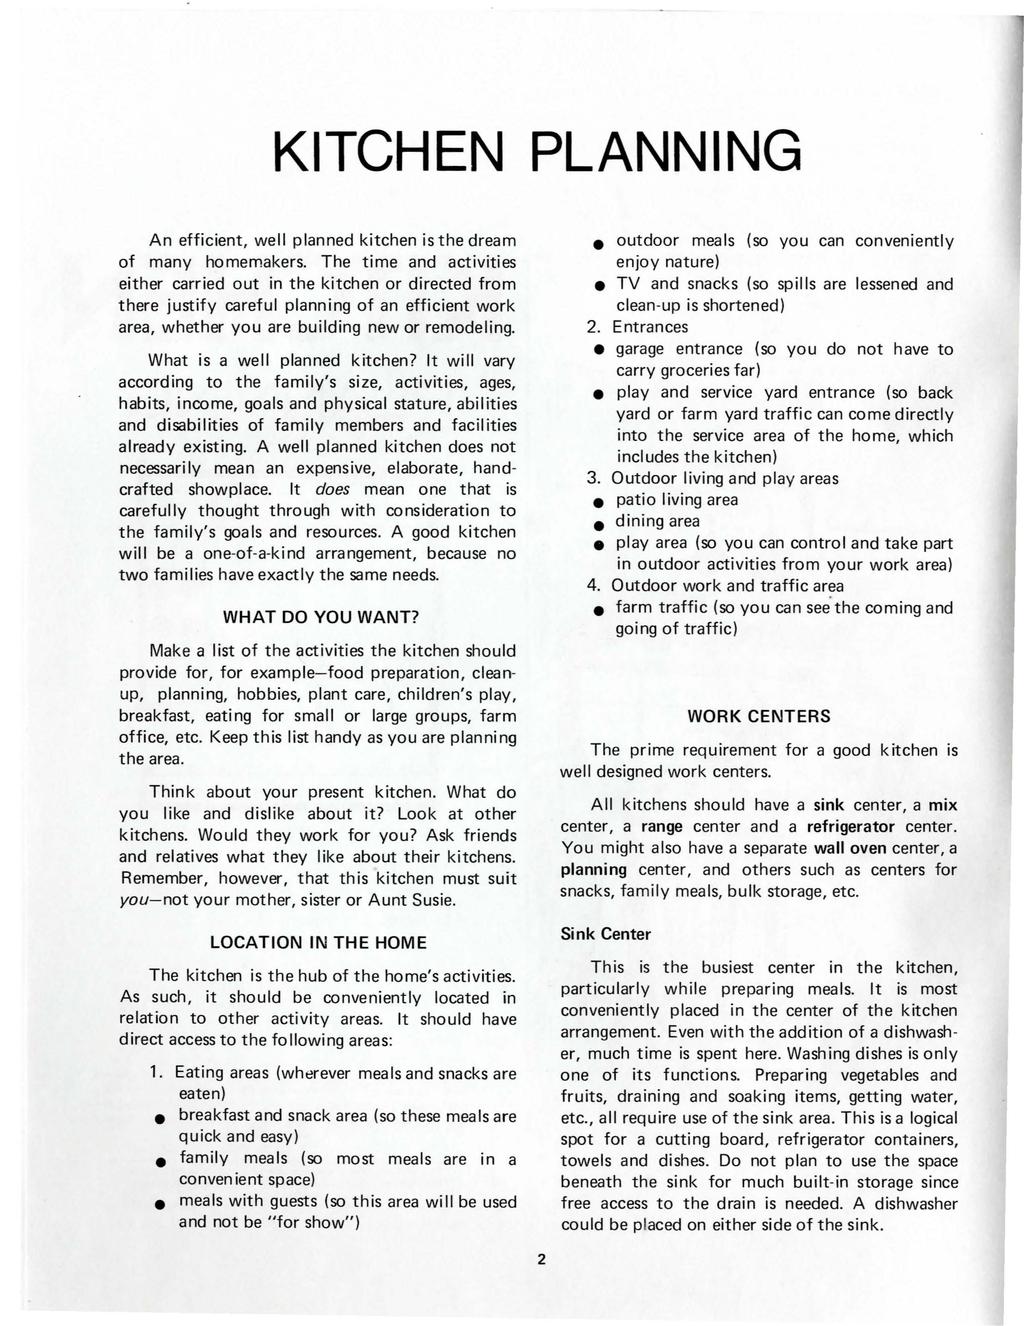 KITCHEN PLANNING An efficient, well planned kitchen is the dream of many homemakers.